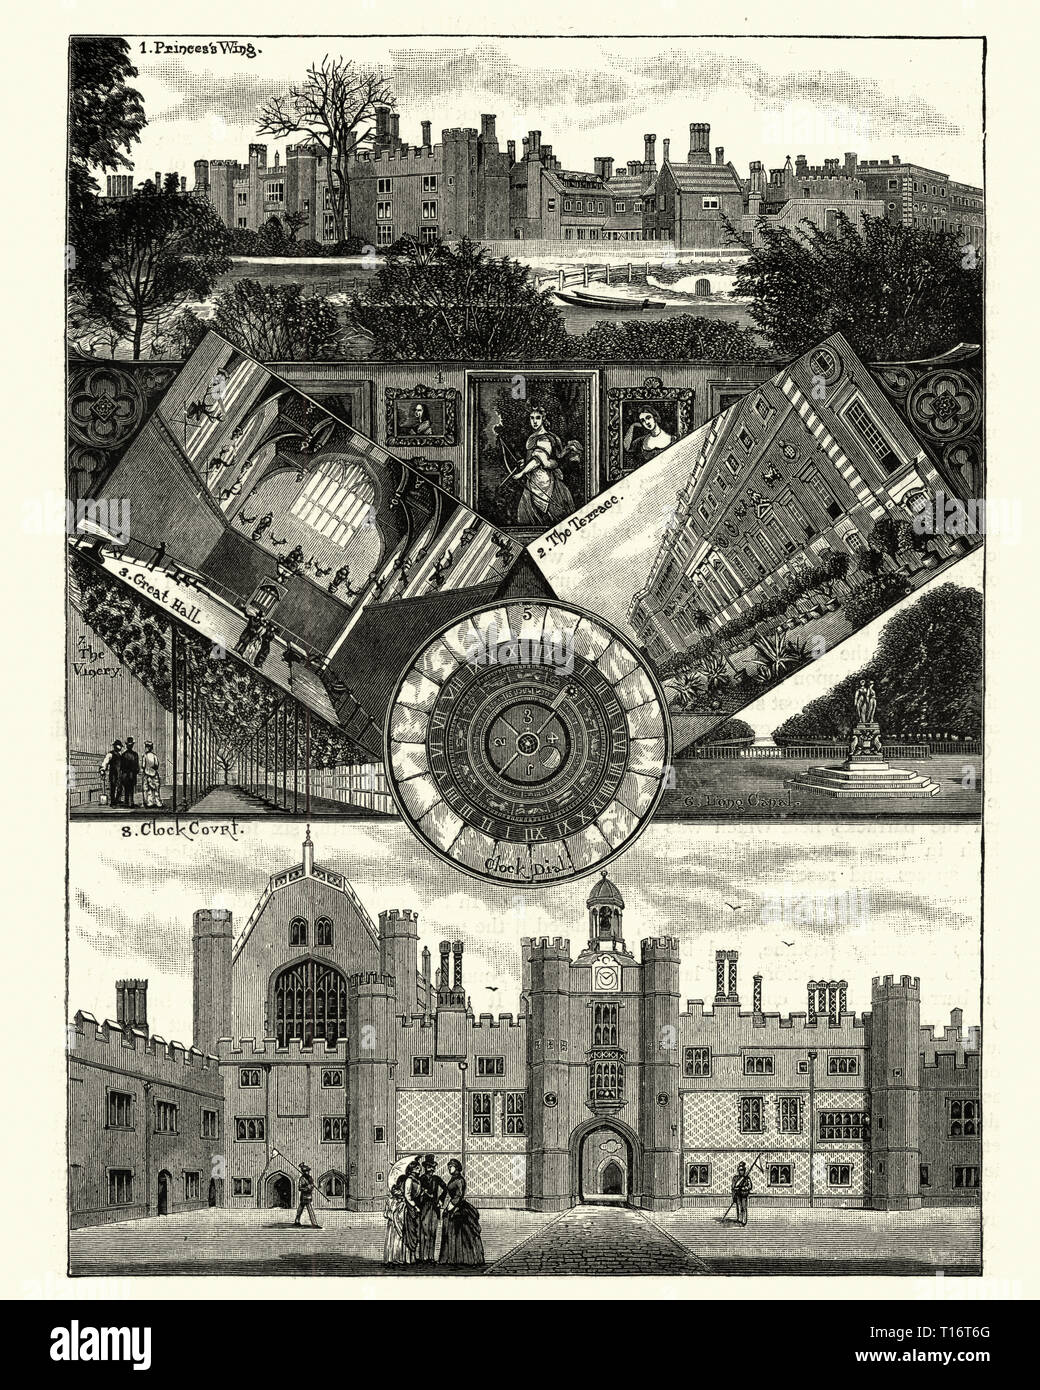 Vintage engraving of Hampton Court Palace, a royal palace in the borough of Richmond upon Thames.  Building of the palace began in 1515 for Cardinal Thomas Wolsey, a favourite of King Henry VIII. Stock Photo